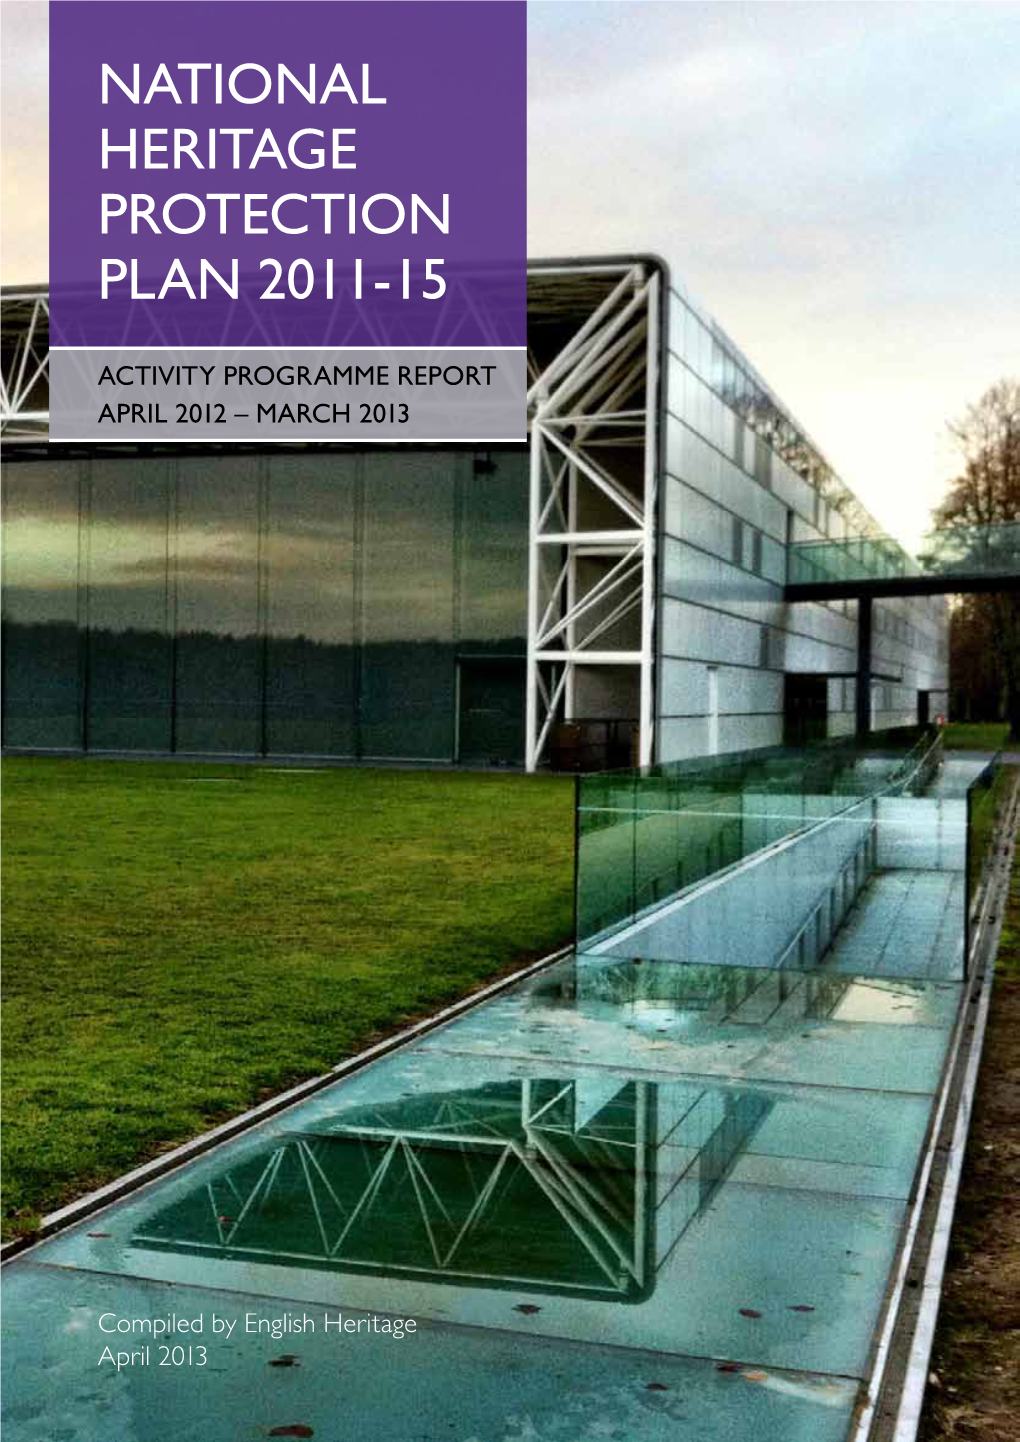 National Heritage Protection Plan: Activity Programme Report April 2012